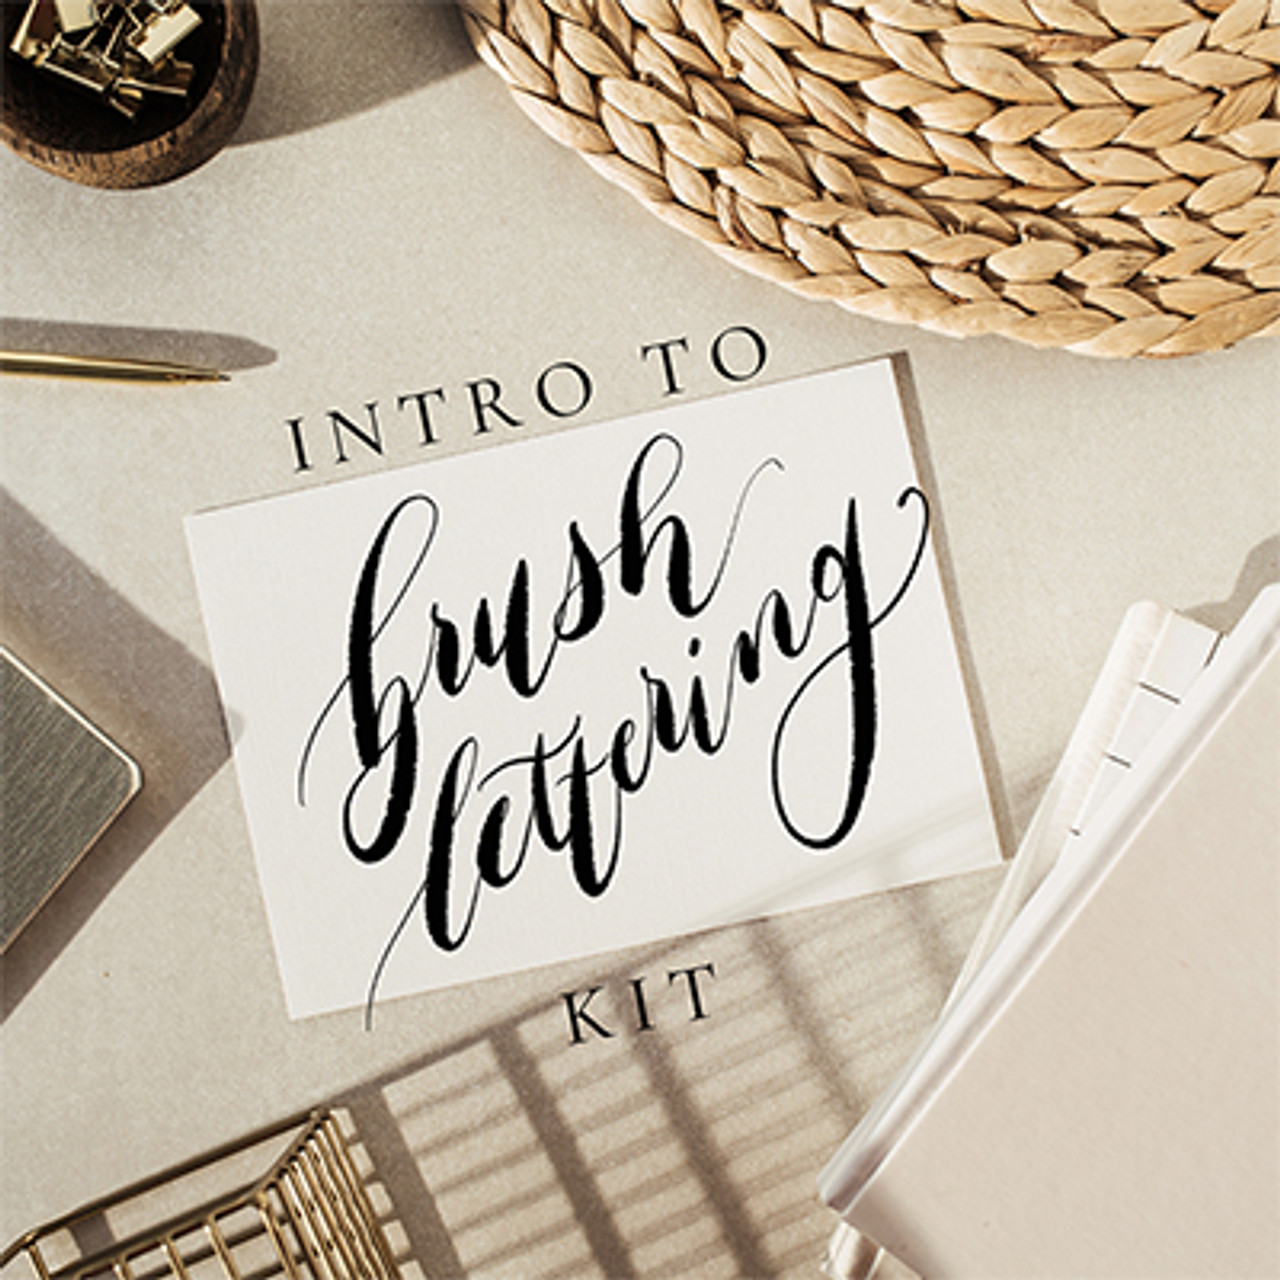 Hand Lettering Kit - Award-Winning DIY Kit includes Book + Supplies